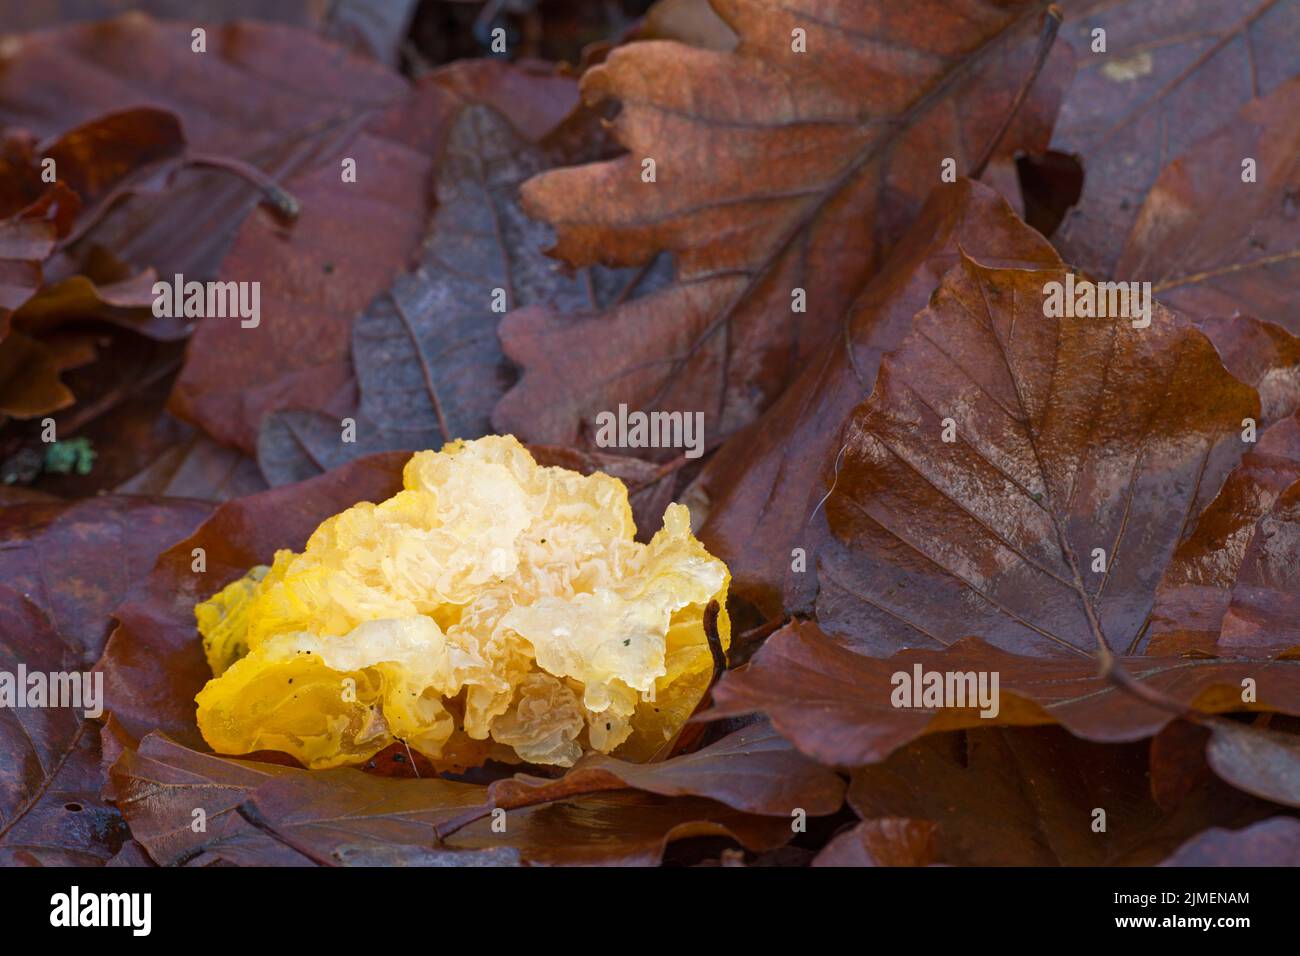 Golden Jelly Fungus lies between foliage after a storm torn off the mushroom from a branch Stock Photo